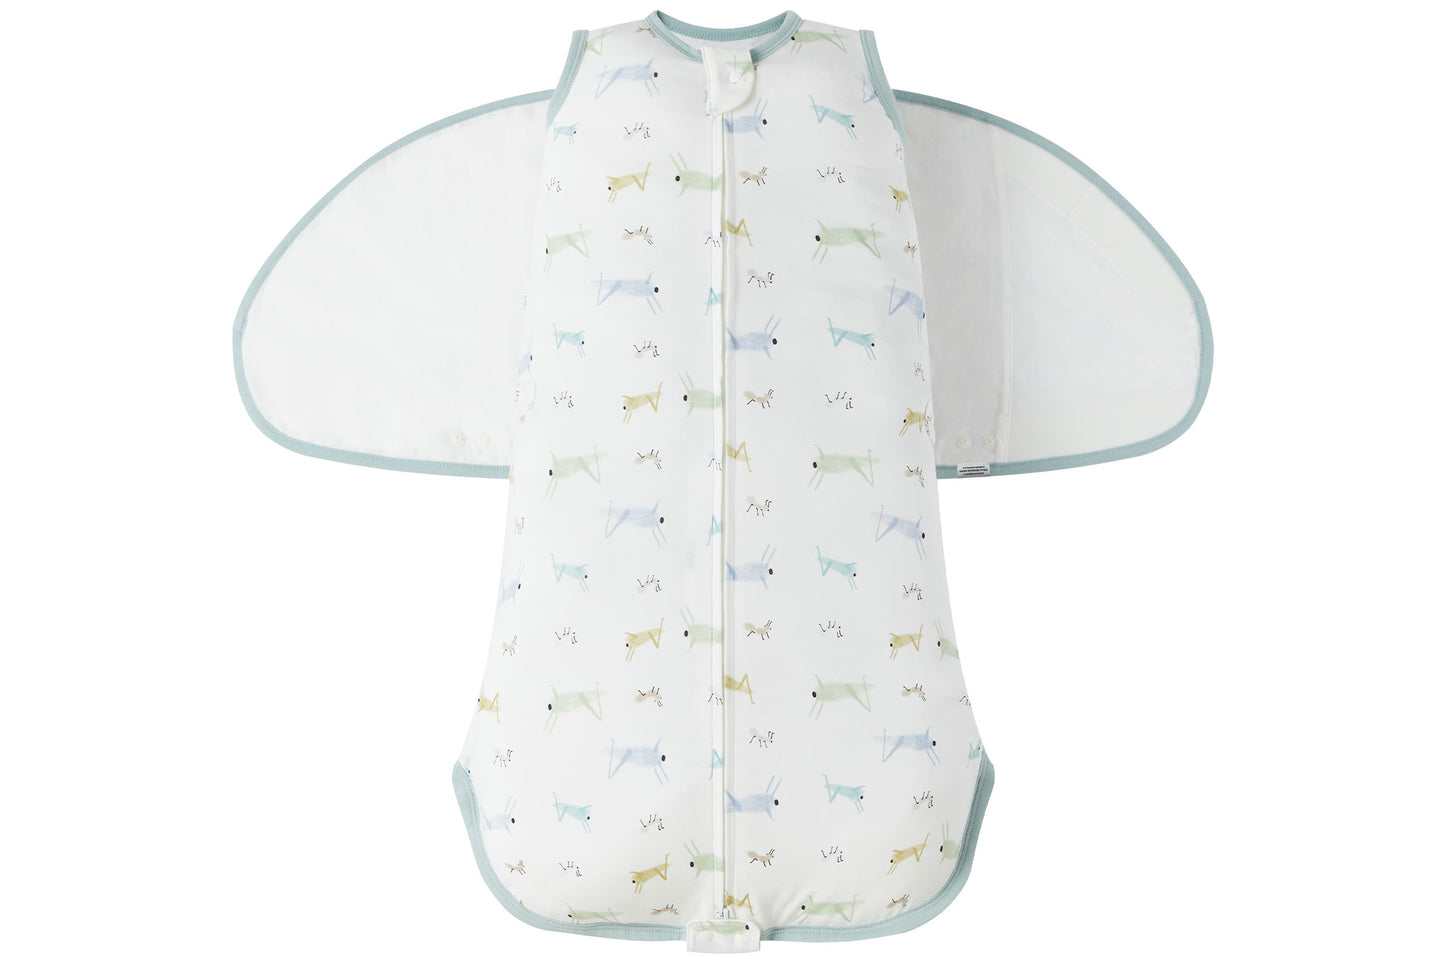 Swaddle Sleep Bag 0.25 TOG (Bamboo Cotton Jersey) - The Ant & The Grasshopper